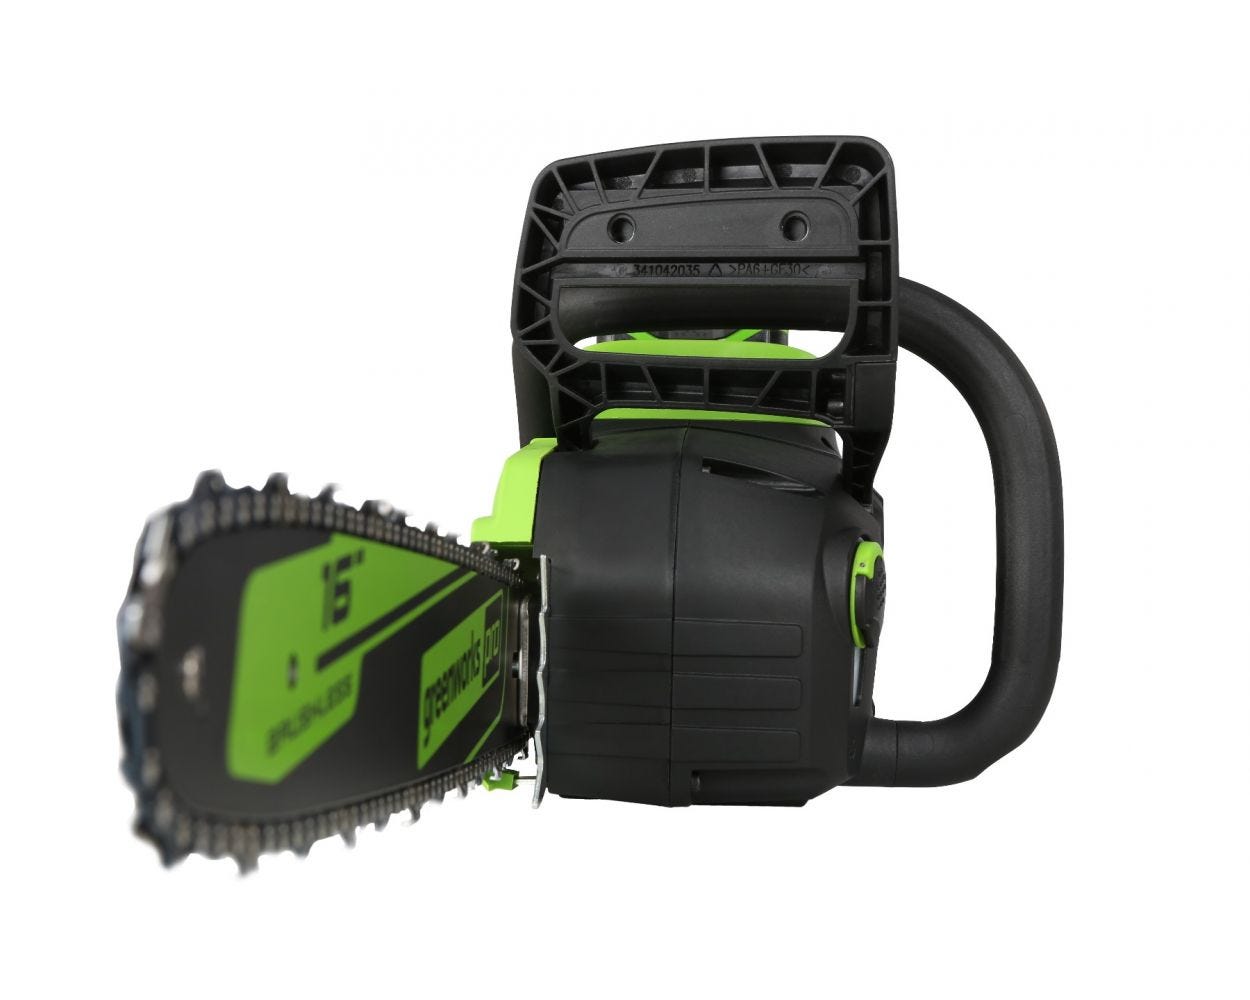 80V 16" Cordless Battery Chainsaw (Tool Only)